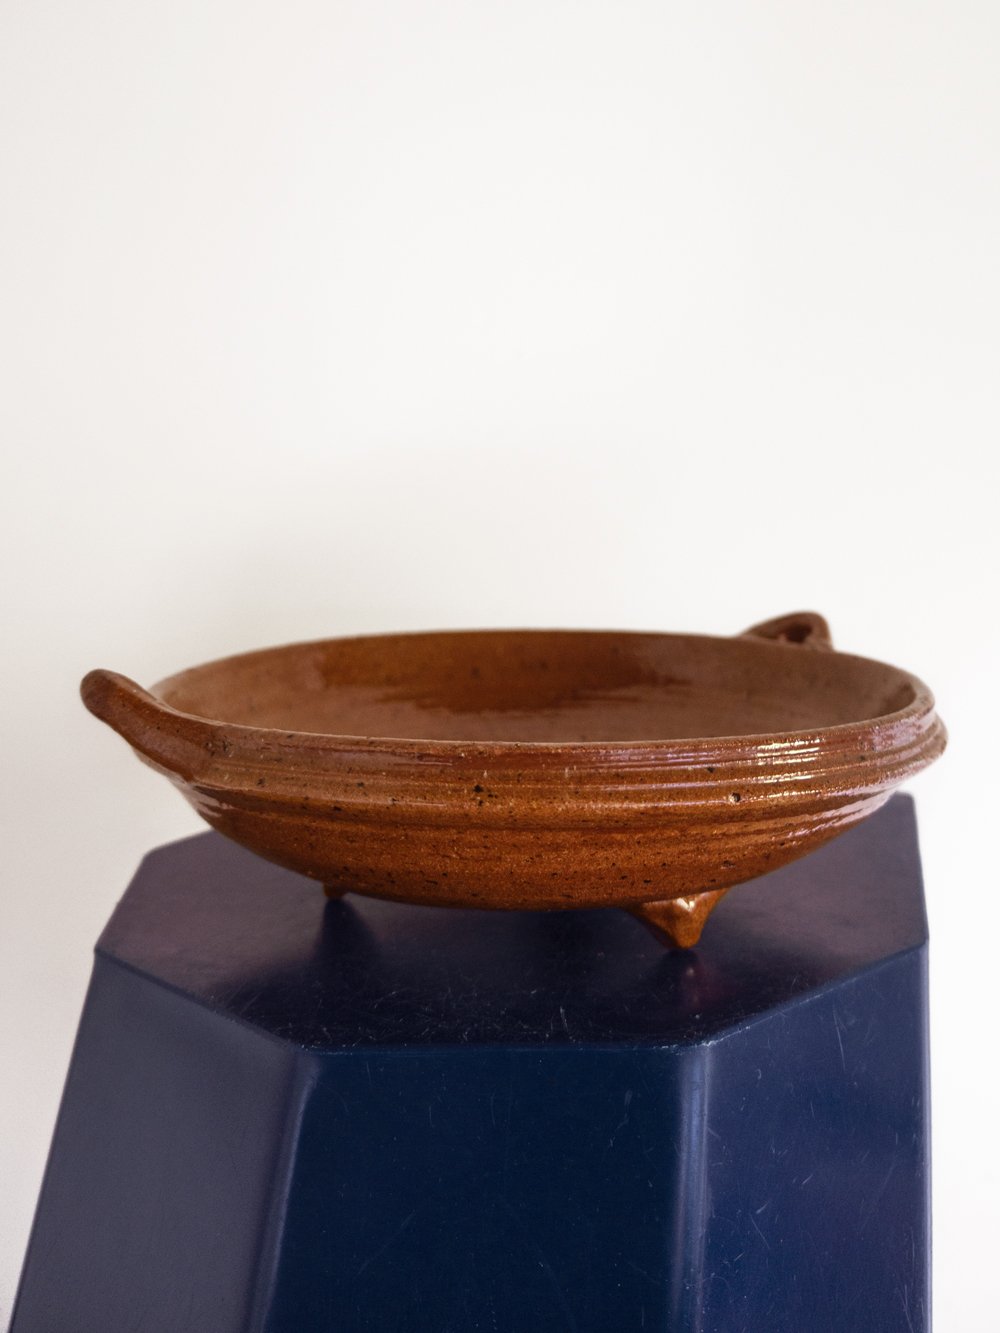 Image of footed bowl